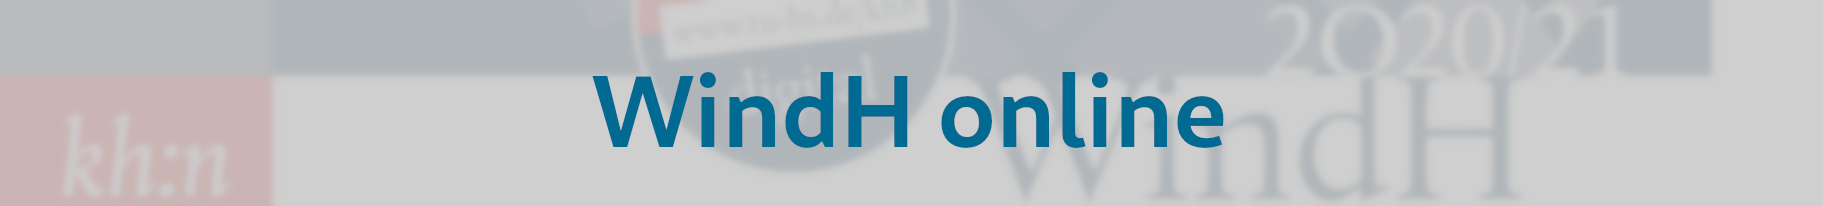 elearning_banner_windh-online.png